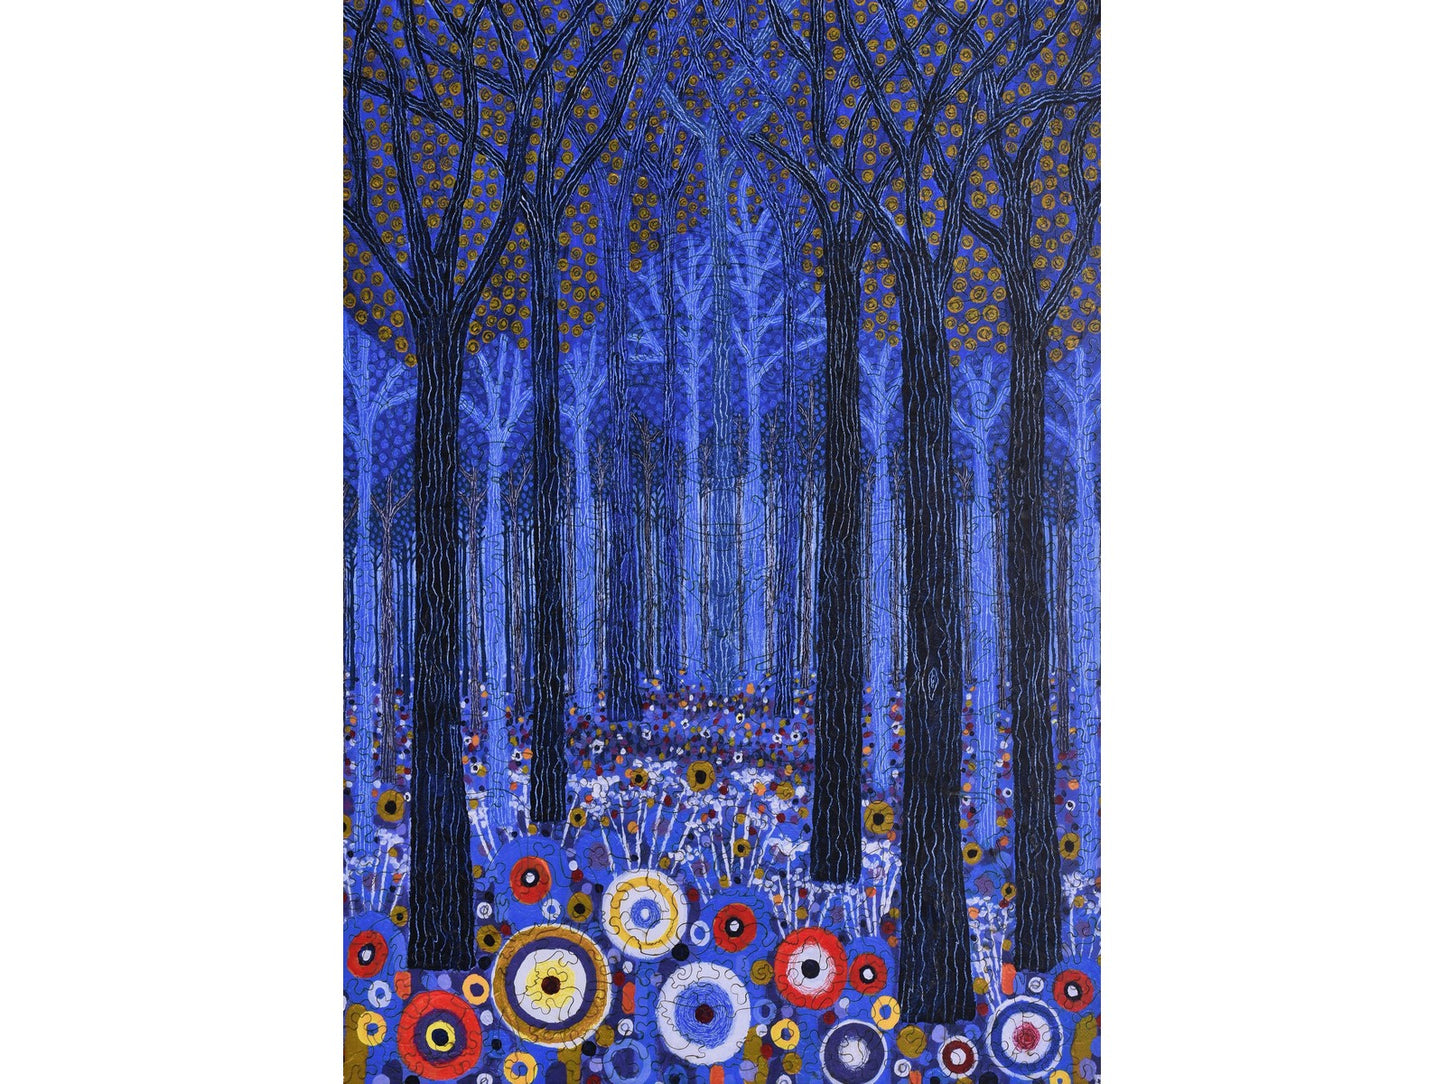 The front of the puzzle, Blue Forest, which shows a forest of blue trees and colorful circles.